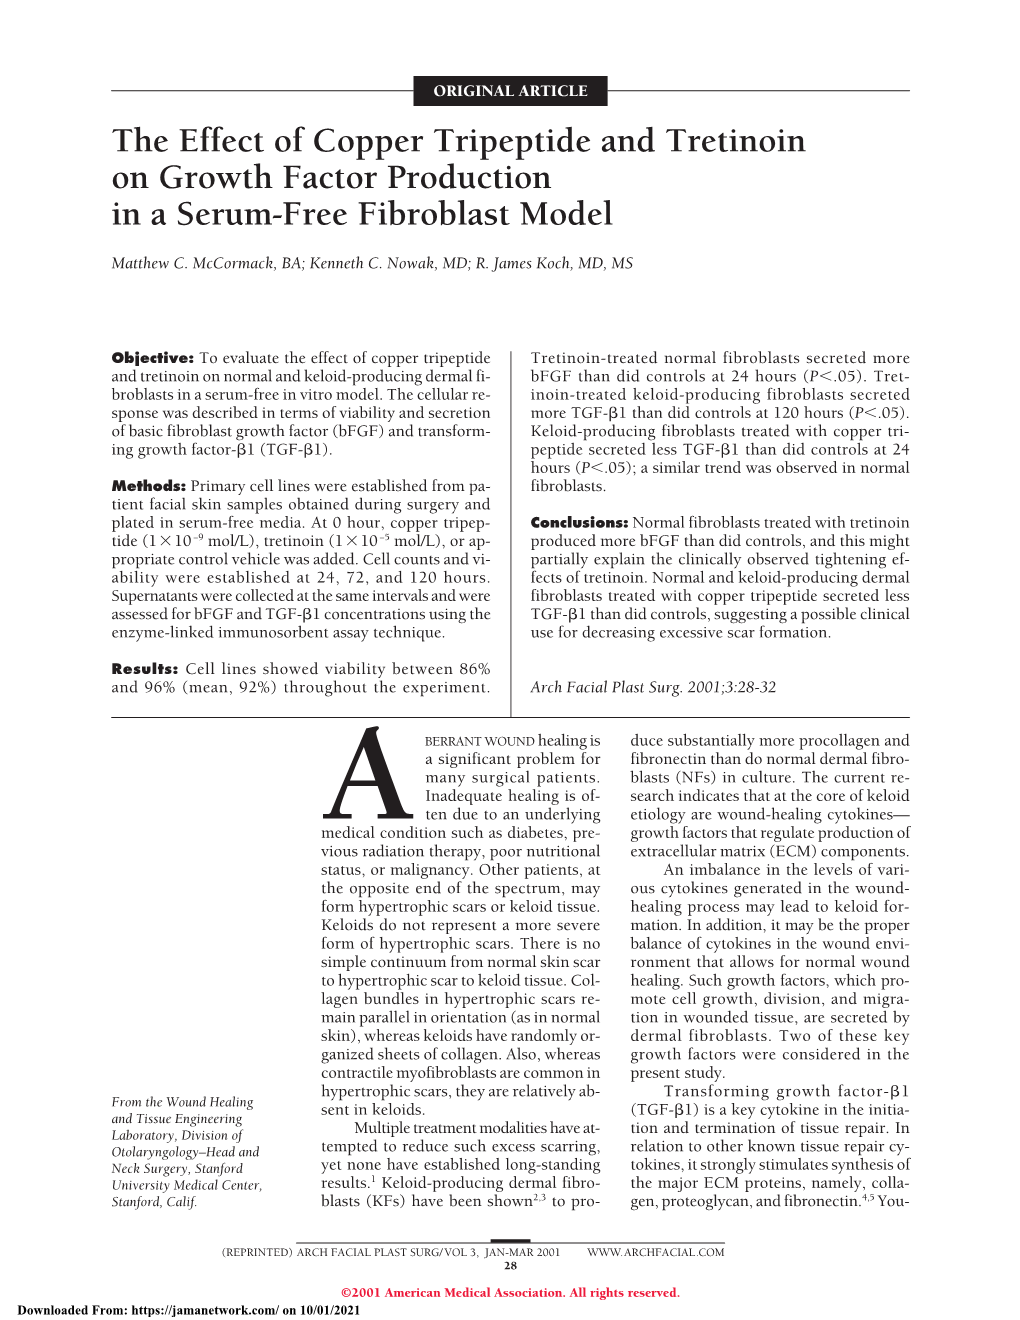 The Effect of Copper Tripeptide and Tretinoin on Growth Factor Production in a Serum-Free Fibroblast Model